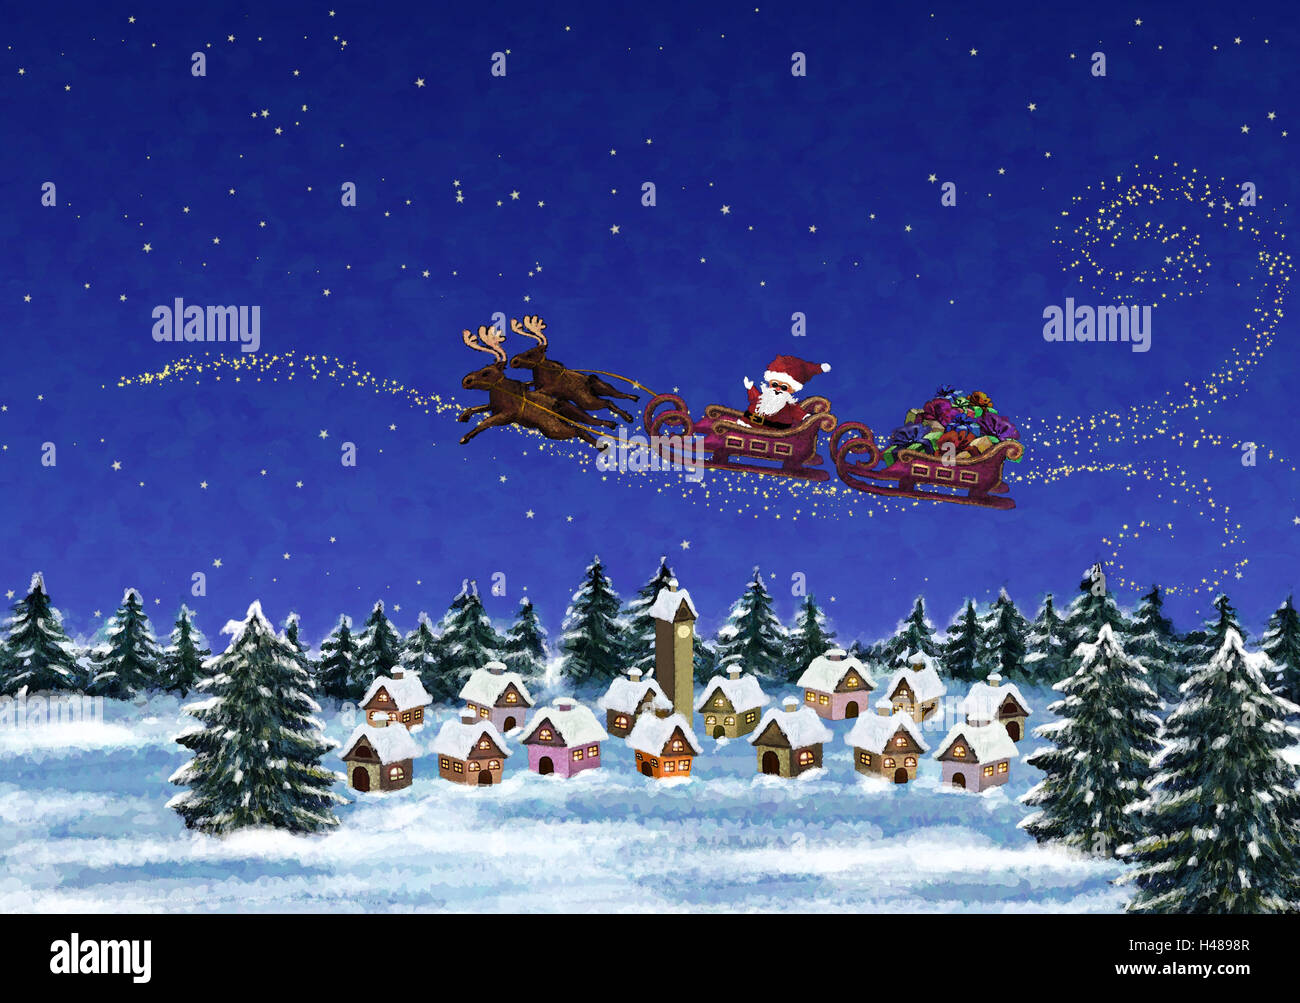 Illustration, village, Santa Claus, reindeer sleigh, fly, distribute Christmas presents, evening, subscription, painting, Christmas, for Christmas, wintry, wood, winter scenery, winter wood, trees, scenery, edge of the forest, snow, Santa Claus, flight, s Stock Photo